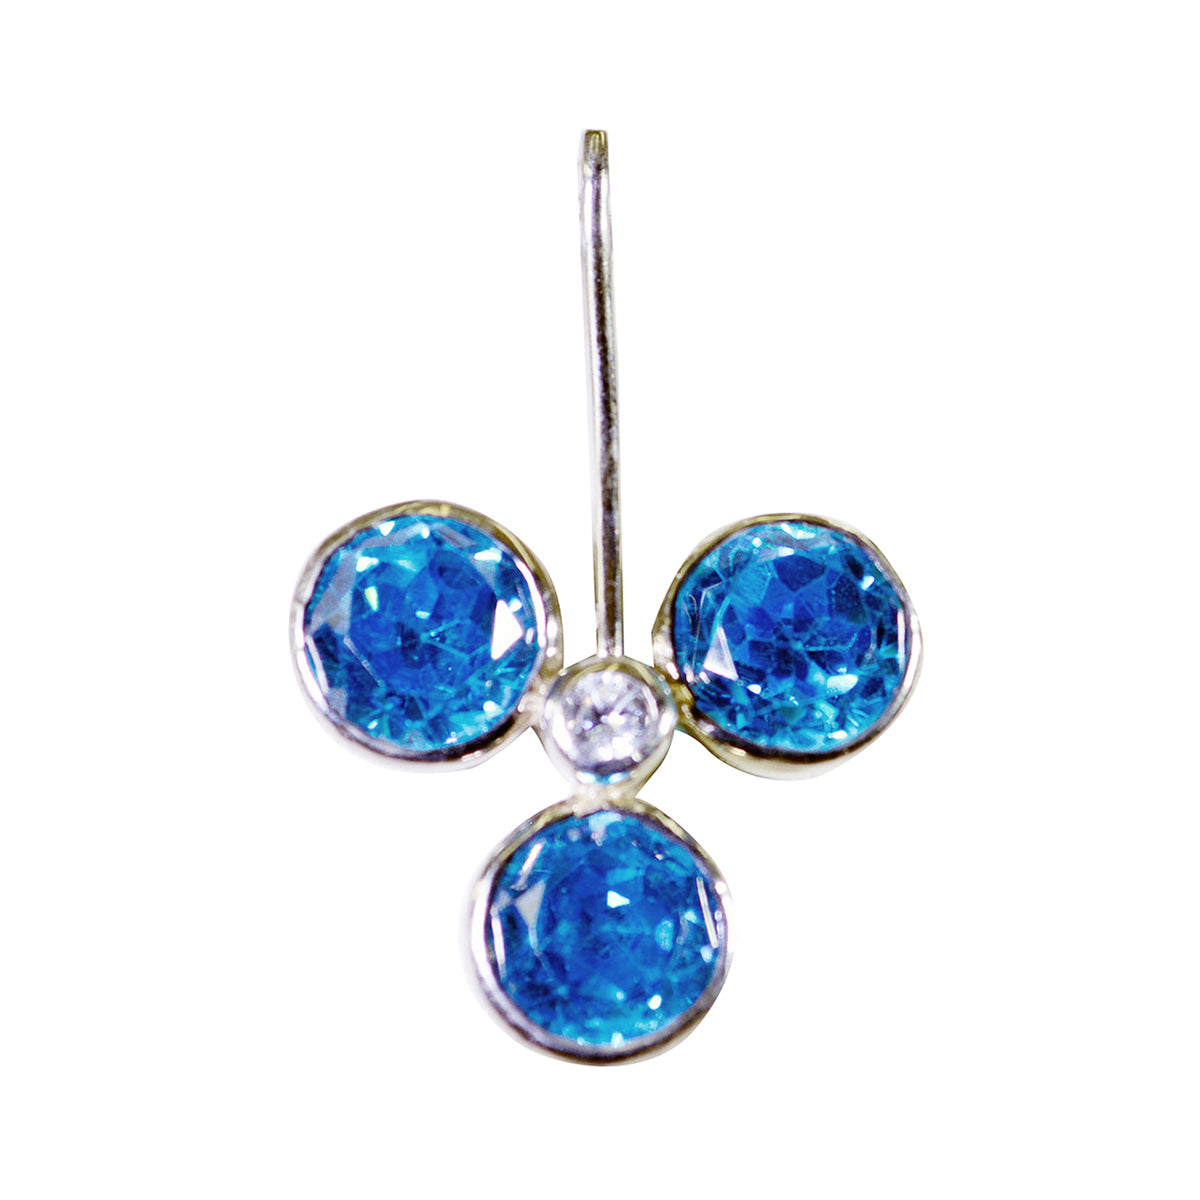 Riyo Appealing Gemstone Round Faceted Blue Blue Topaz 1034 Sterling Silver Pendant Gift For Good Friday